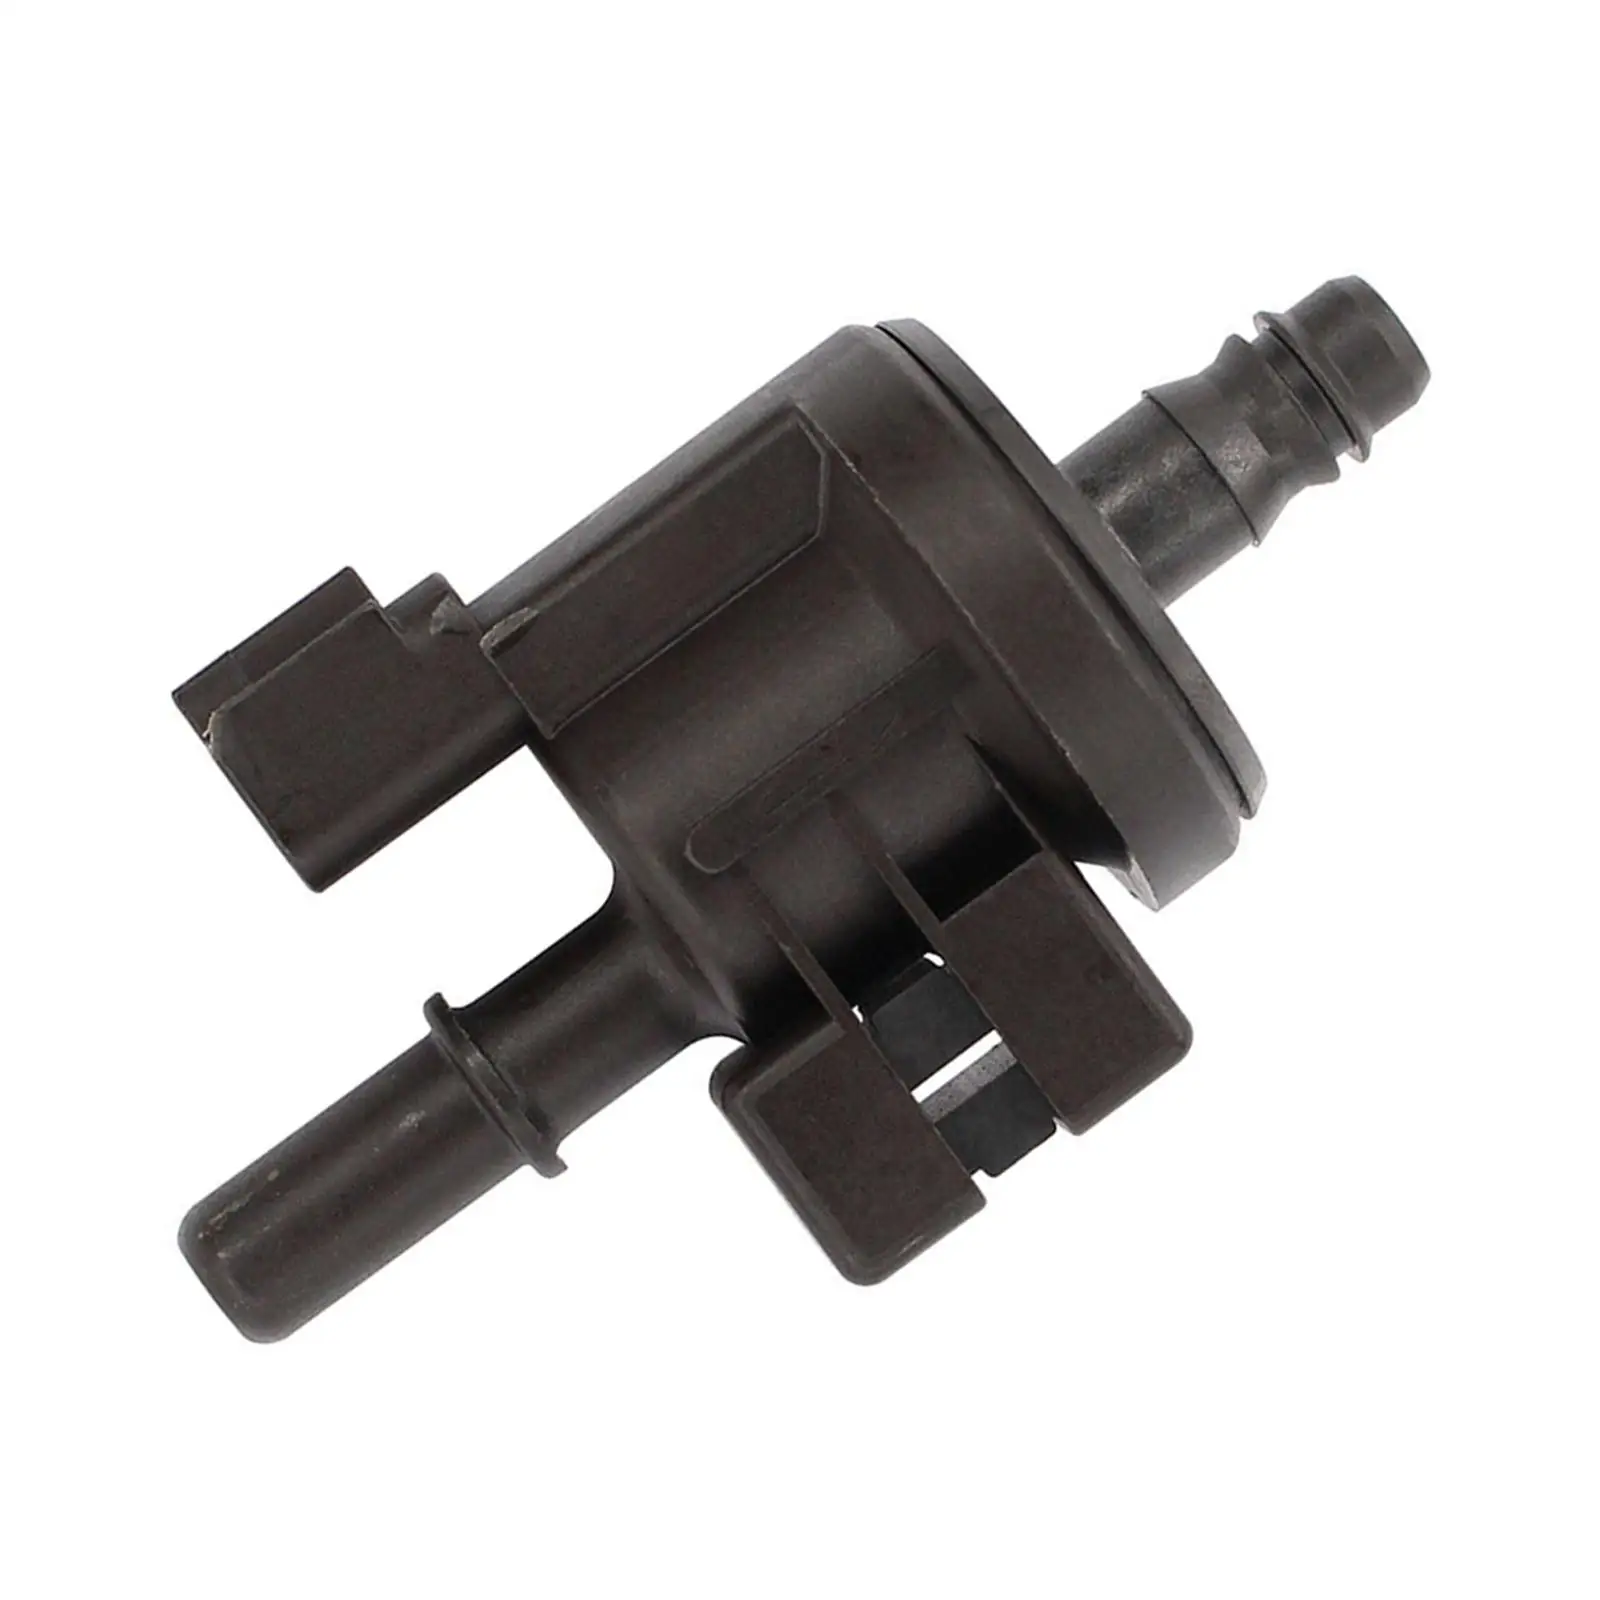 Car Fuel Vapor Canister Purge Valve Replacement Fit for  F150 Mondeo